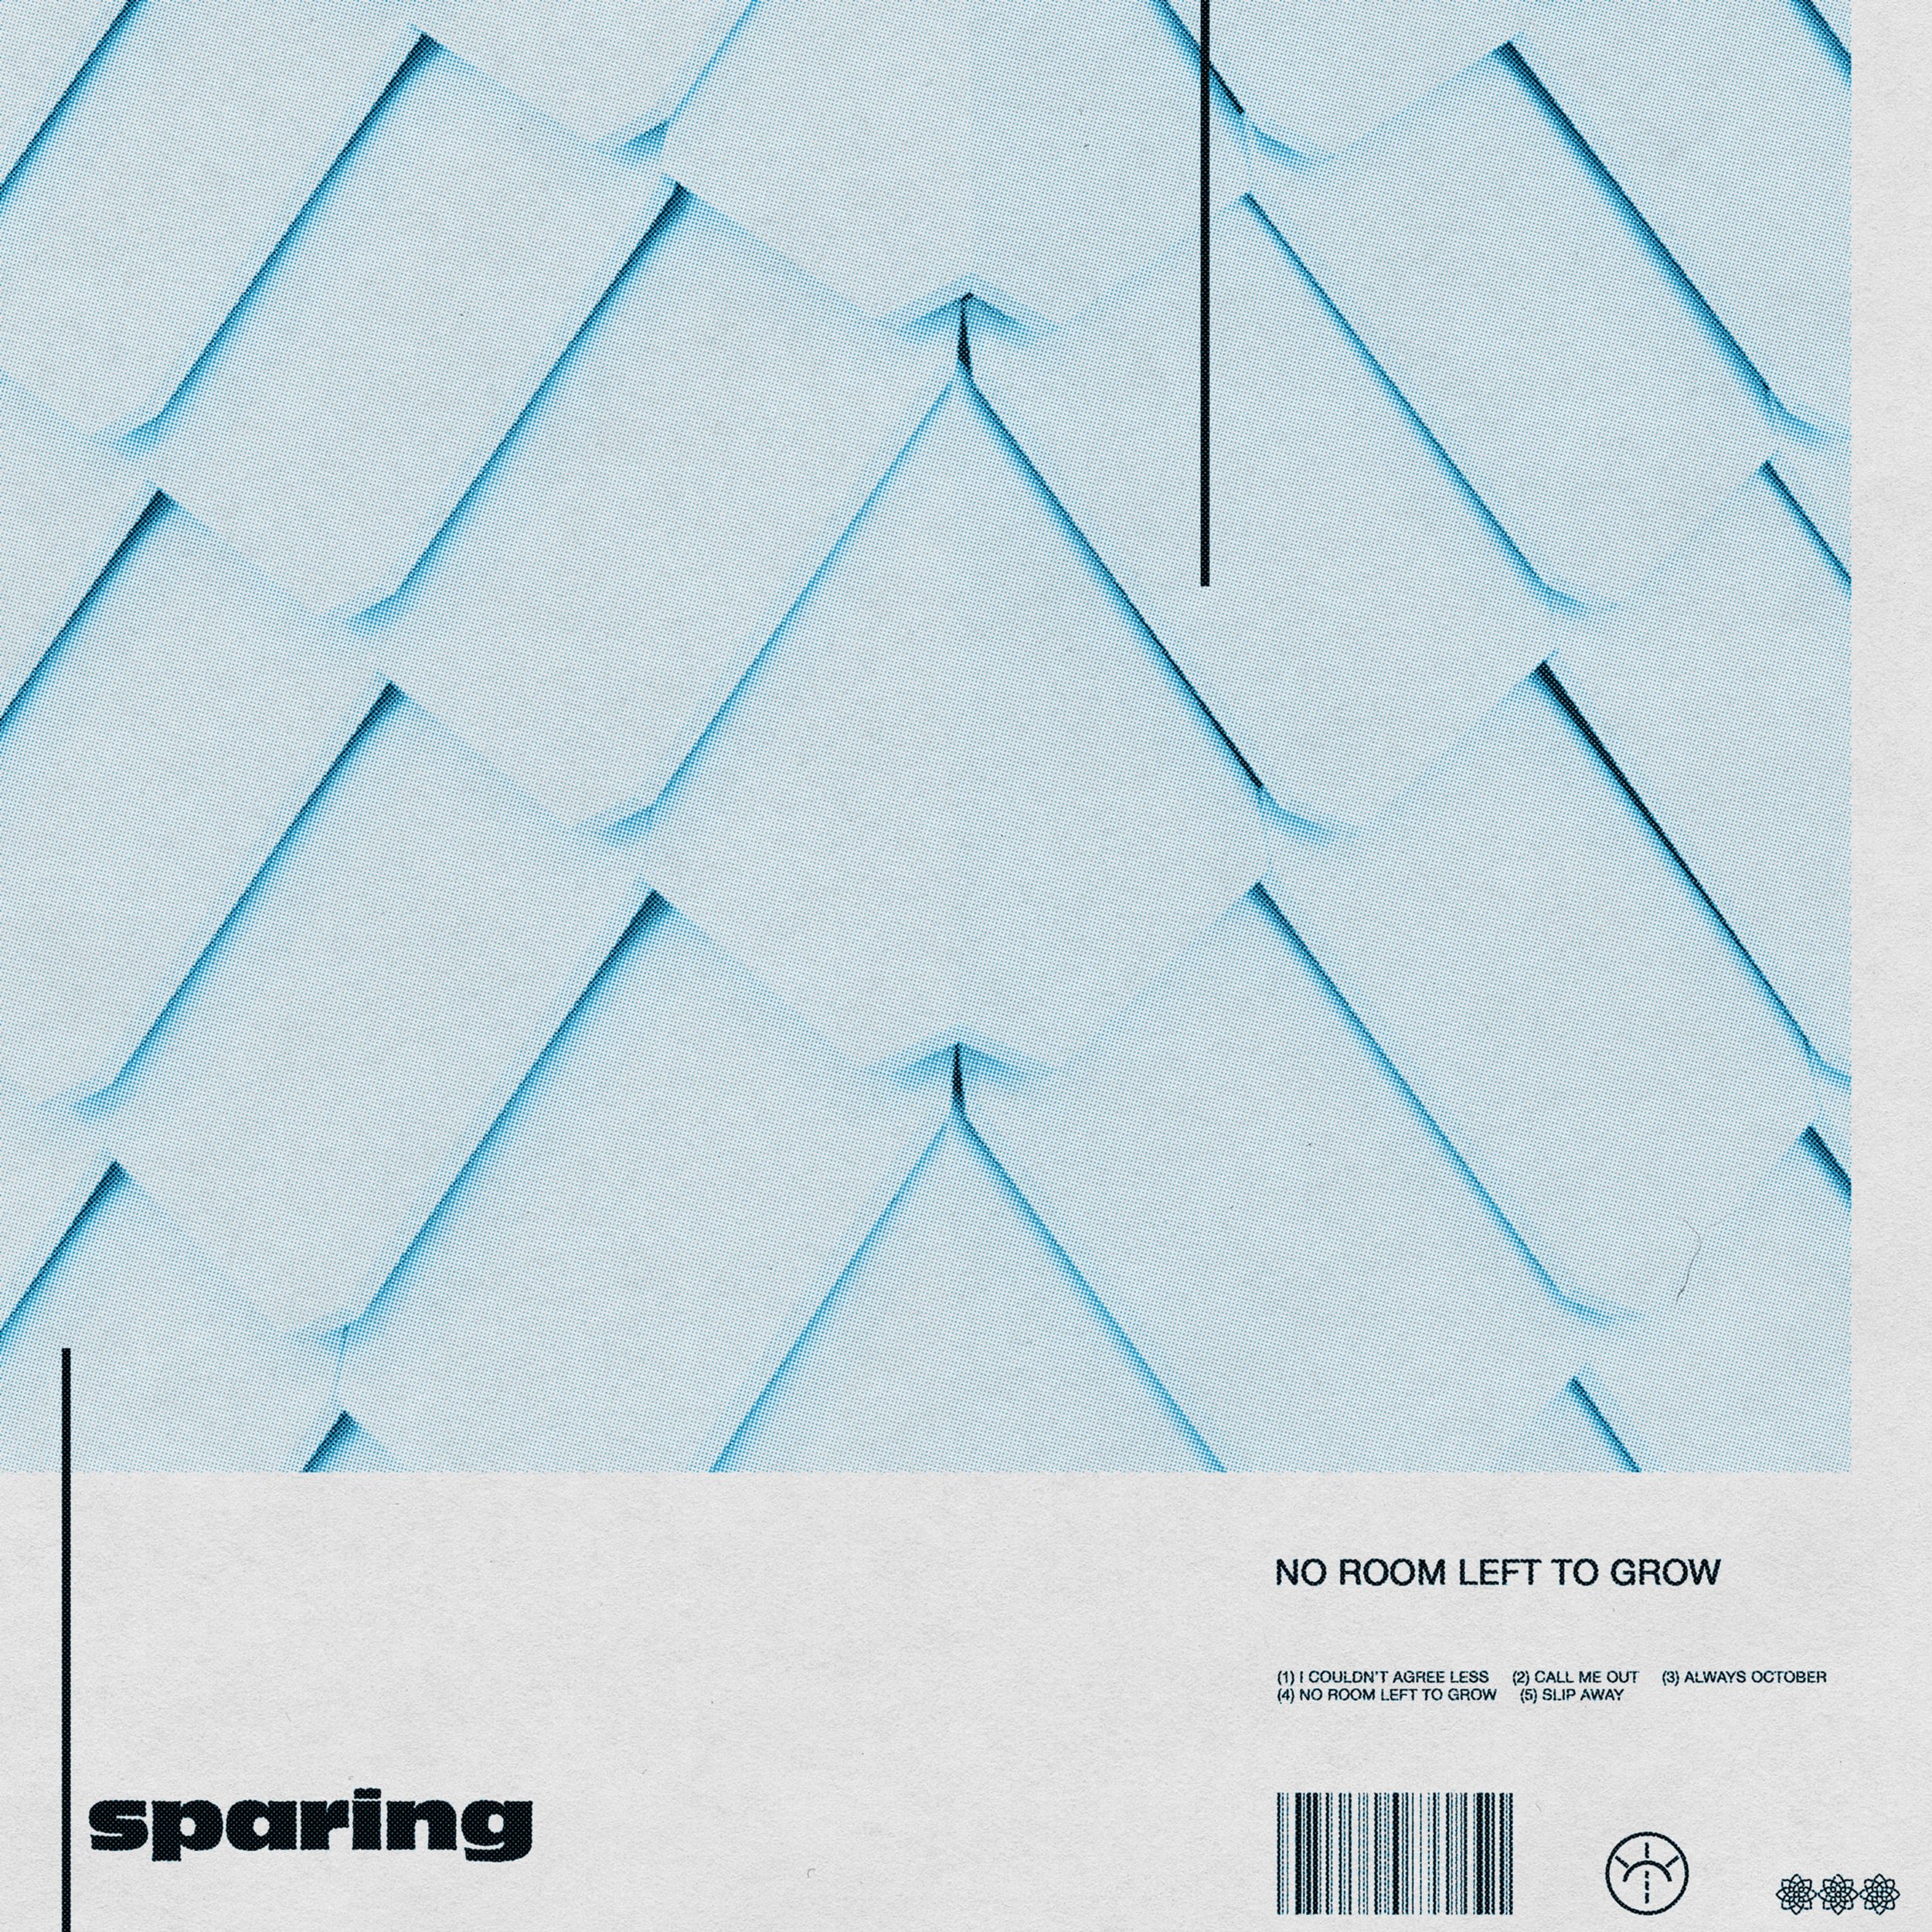 Sparing - No Room Left To Grow - Cover.jpg